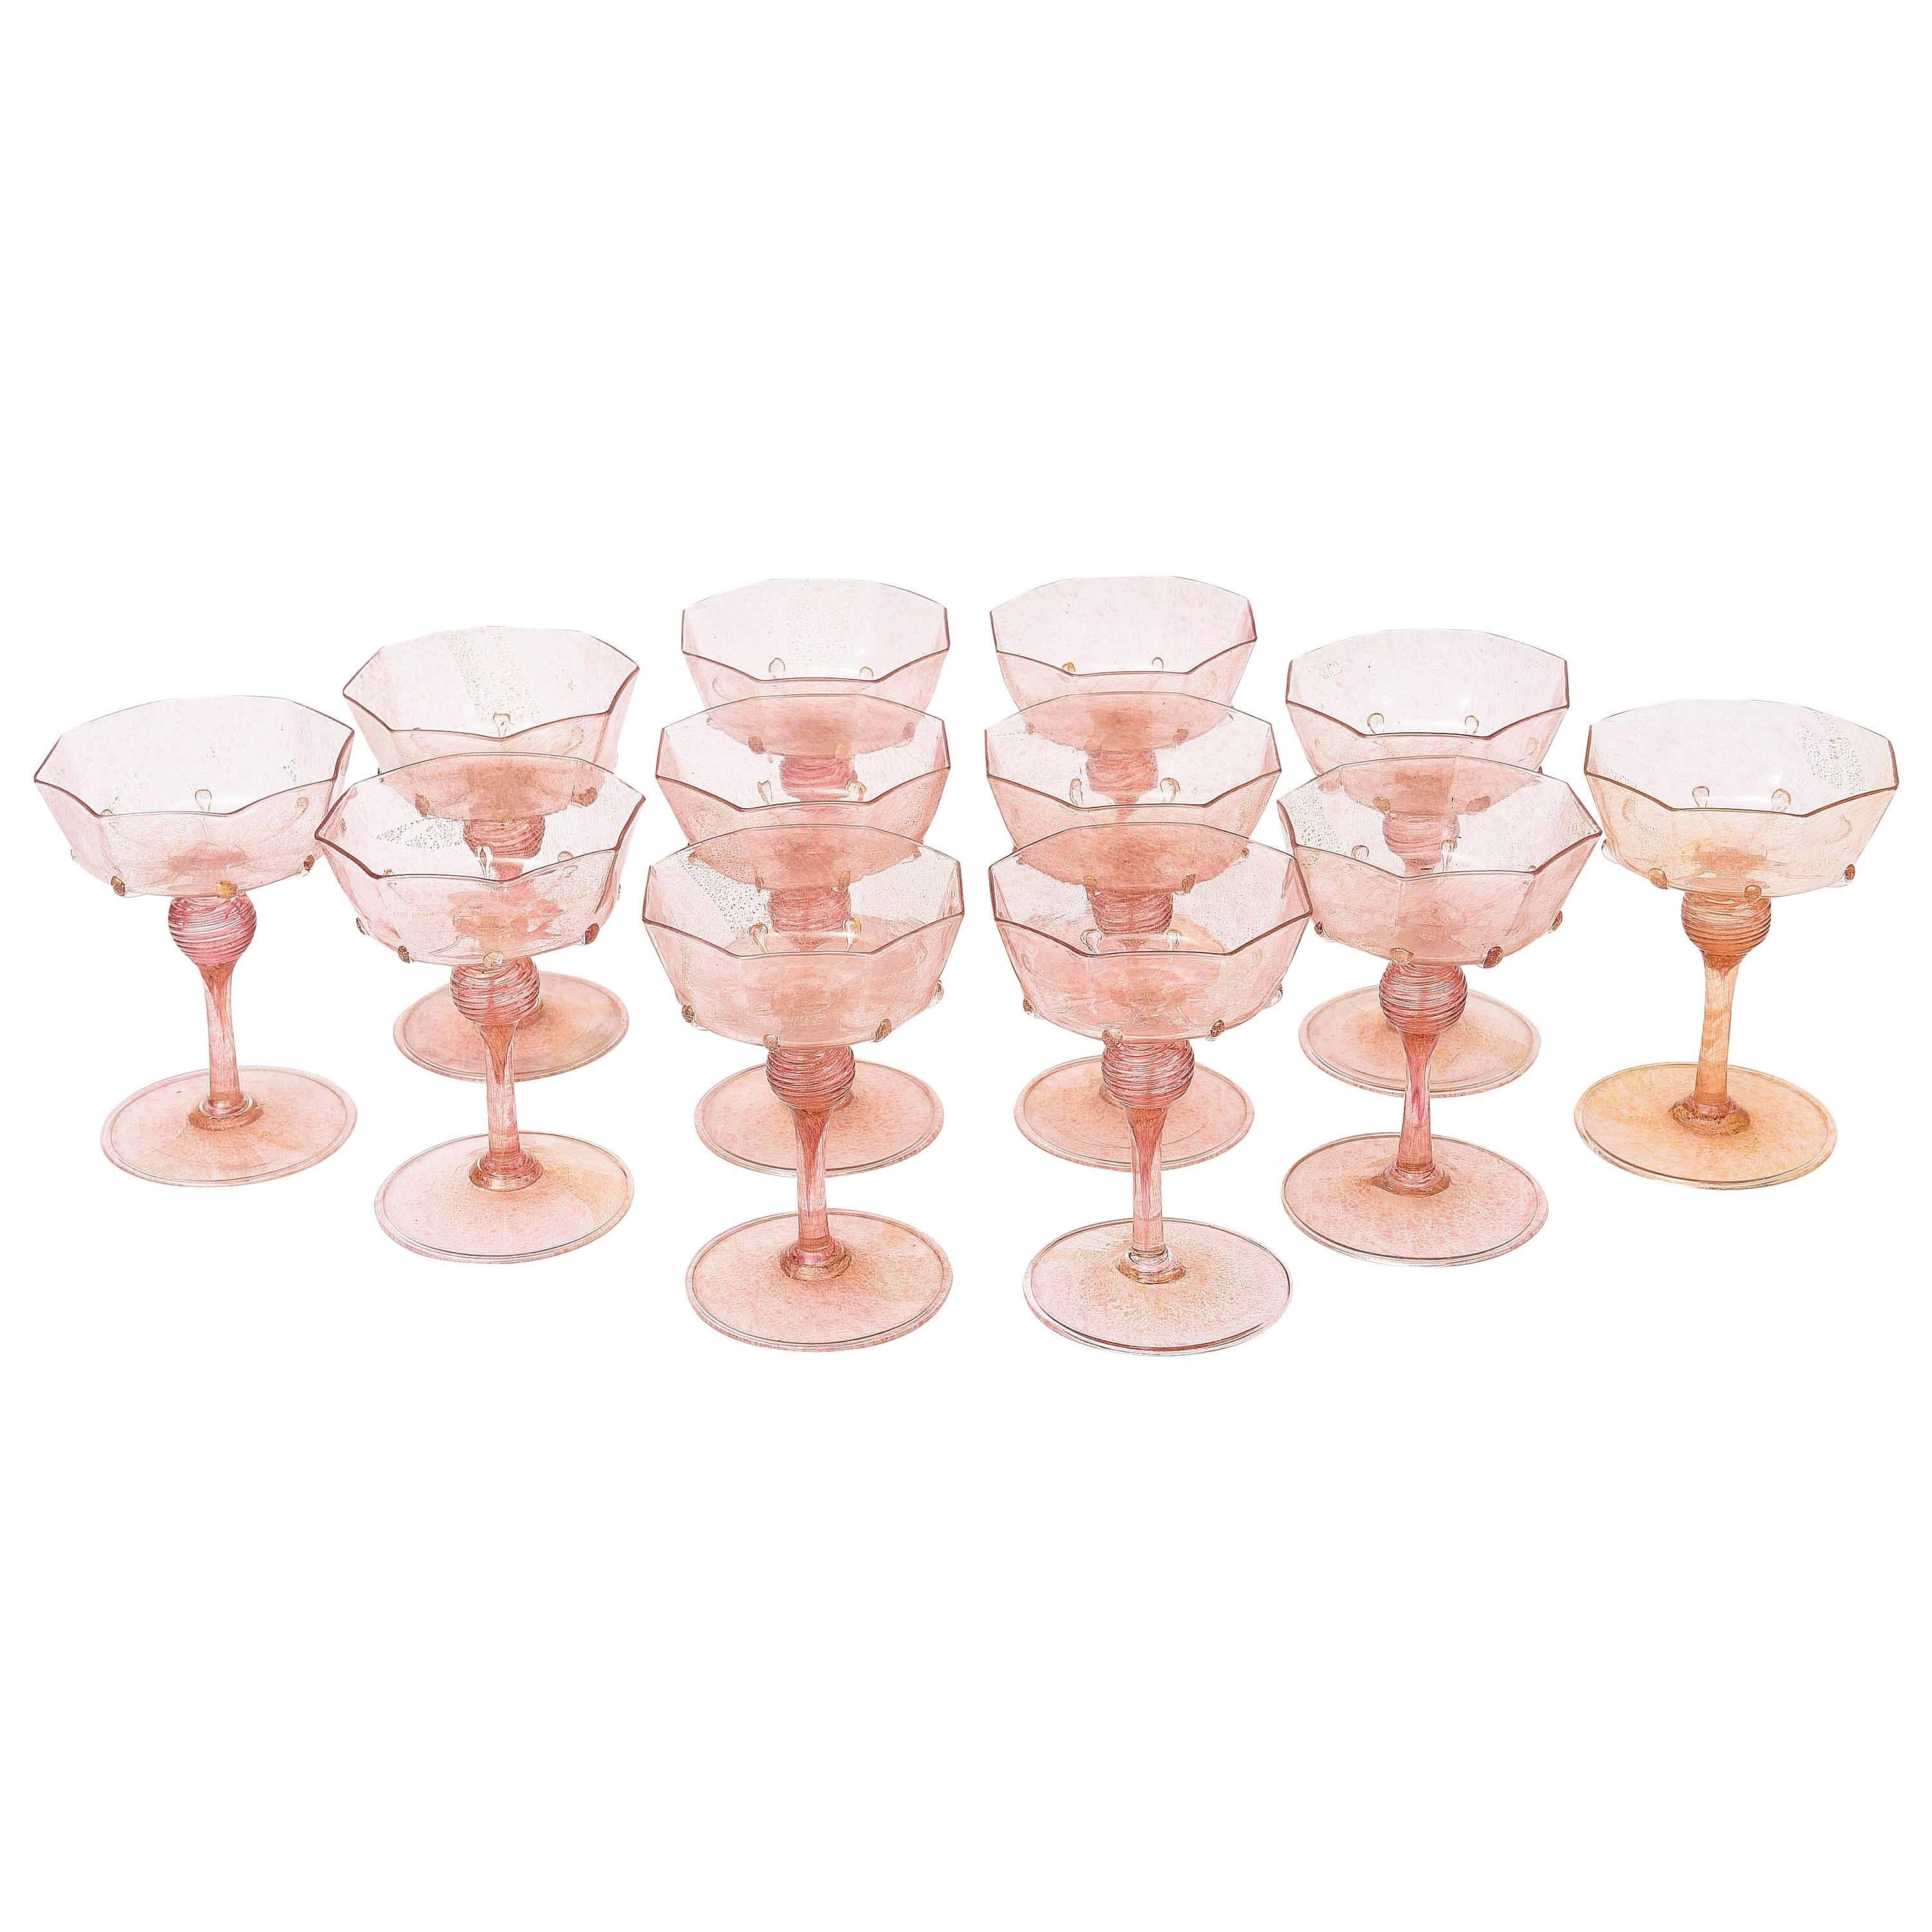 12 Venetian Champagne Goblets, Pretty Pink with 24kt Gold Inclusion